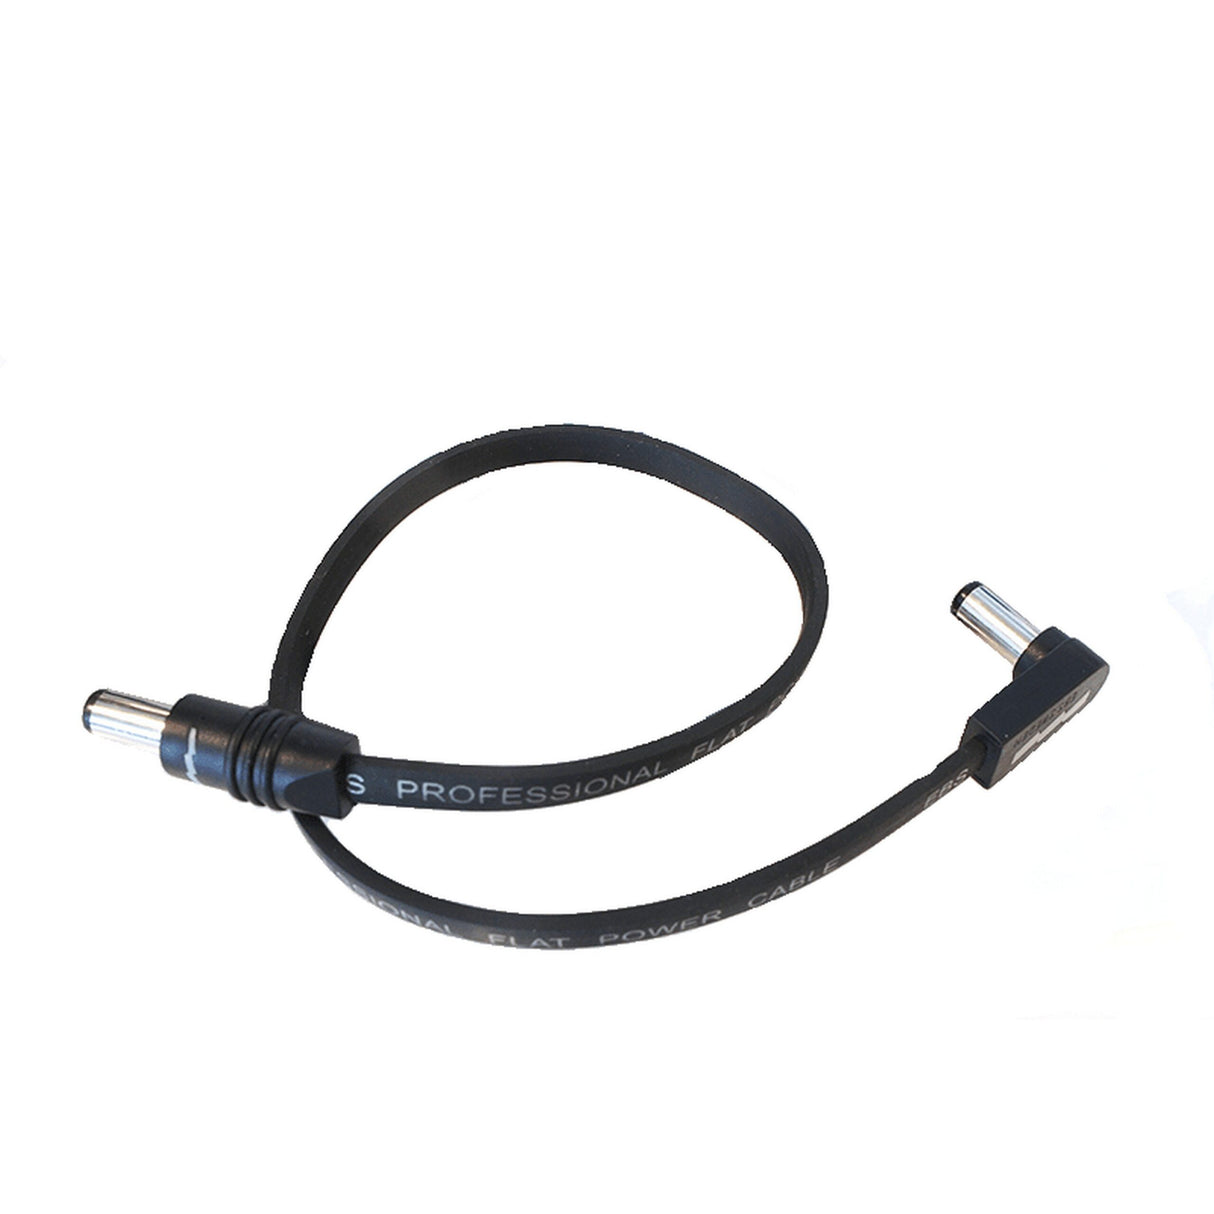 EBS DC1-48 90/90 Flat Power Cable, 48 Centimeters